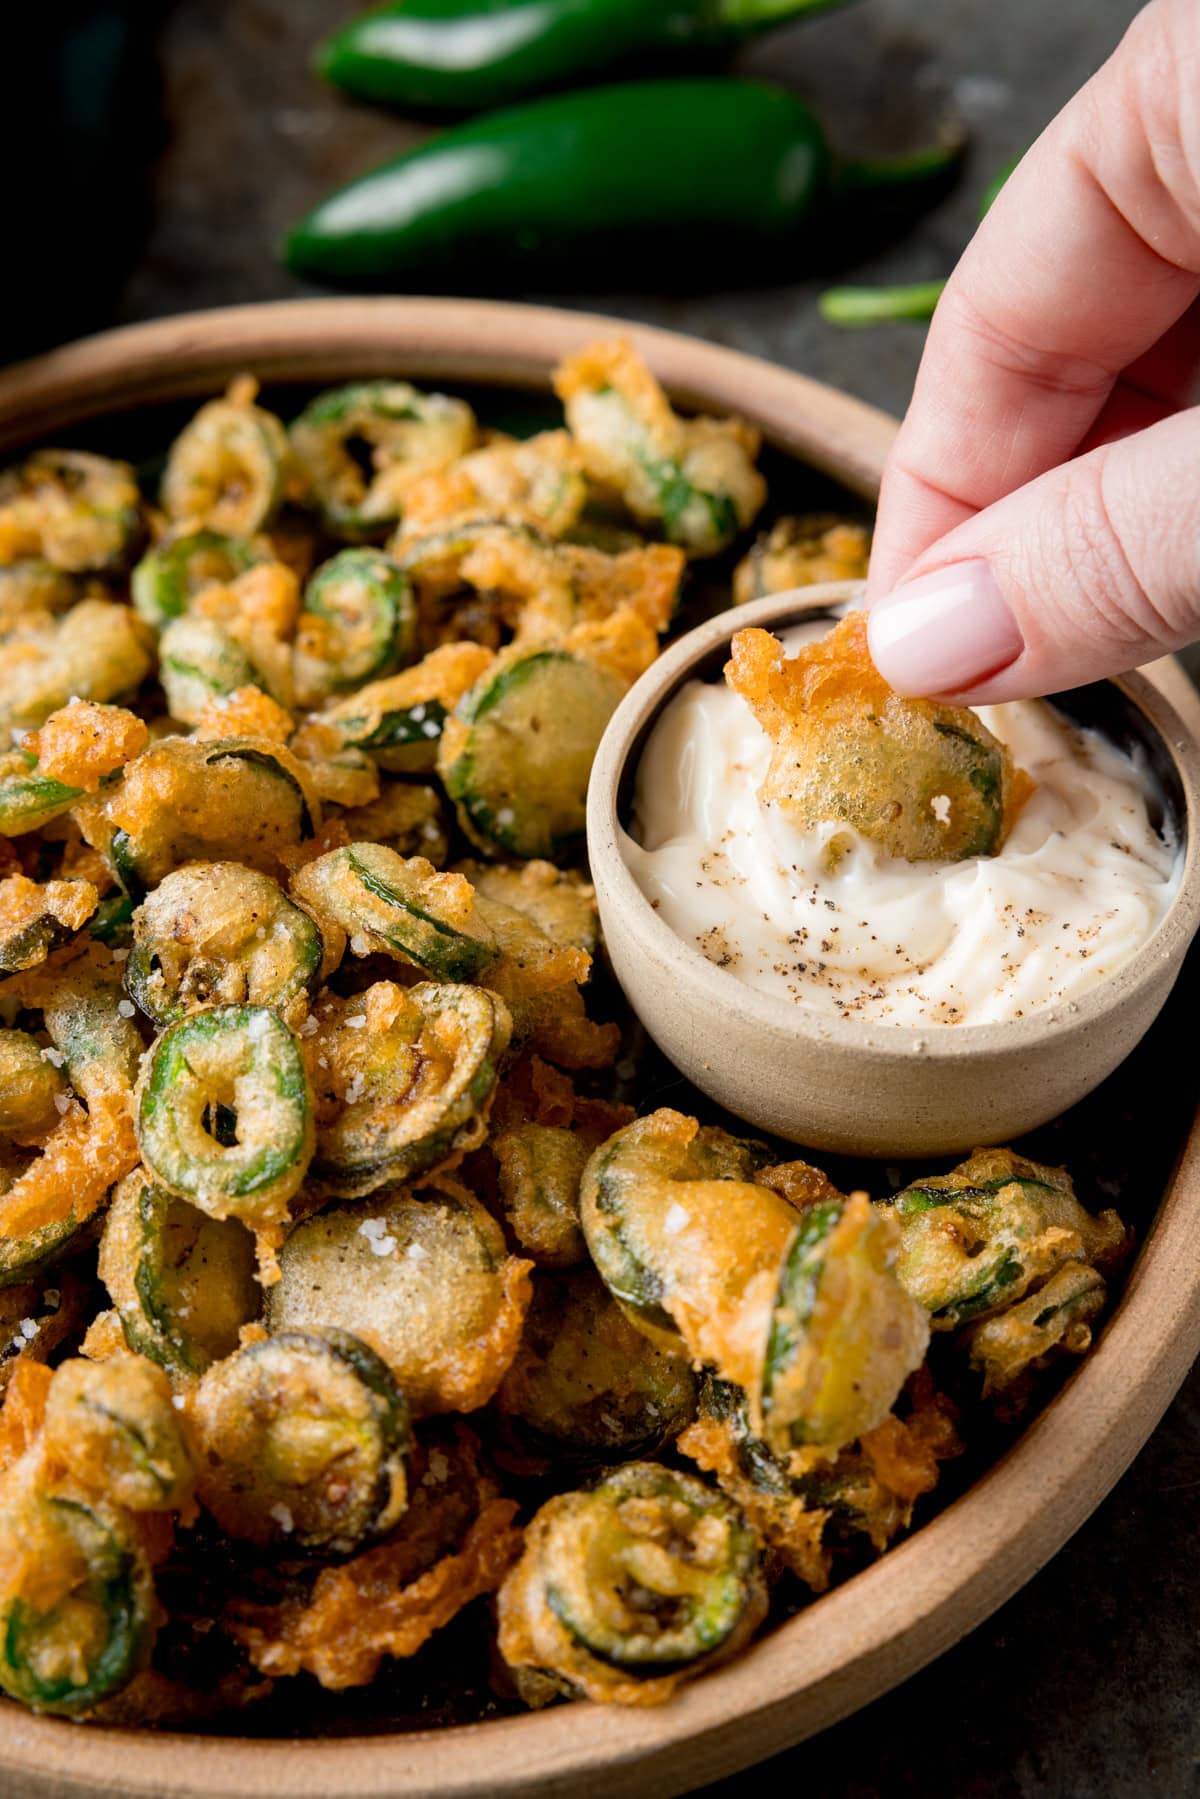 A tall image of a light brown bowl of fried Jalapenos. In the top right of the bowl, there is a light grey dish nestled in the fried Jalapenos, which has garlic mayo in it. There is a hand coming from the right of the screen, which is holding a fried Jalapeno slice and dipping it in the dish of garlic mayo. In the top middle of the background, you can see two fresh, green Jalapenos next to each other. This is all set on a grey surface.